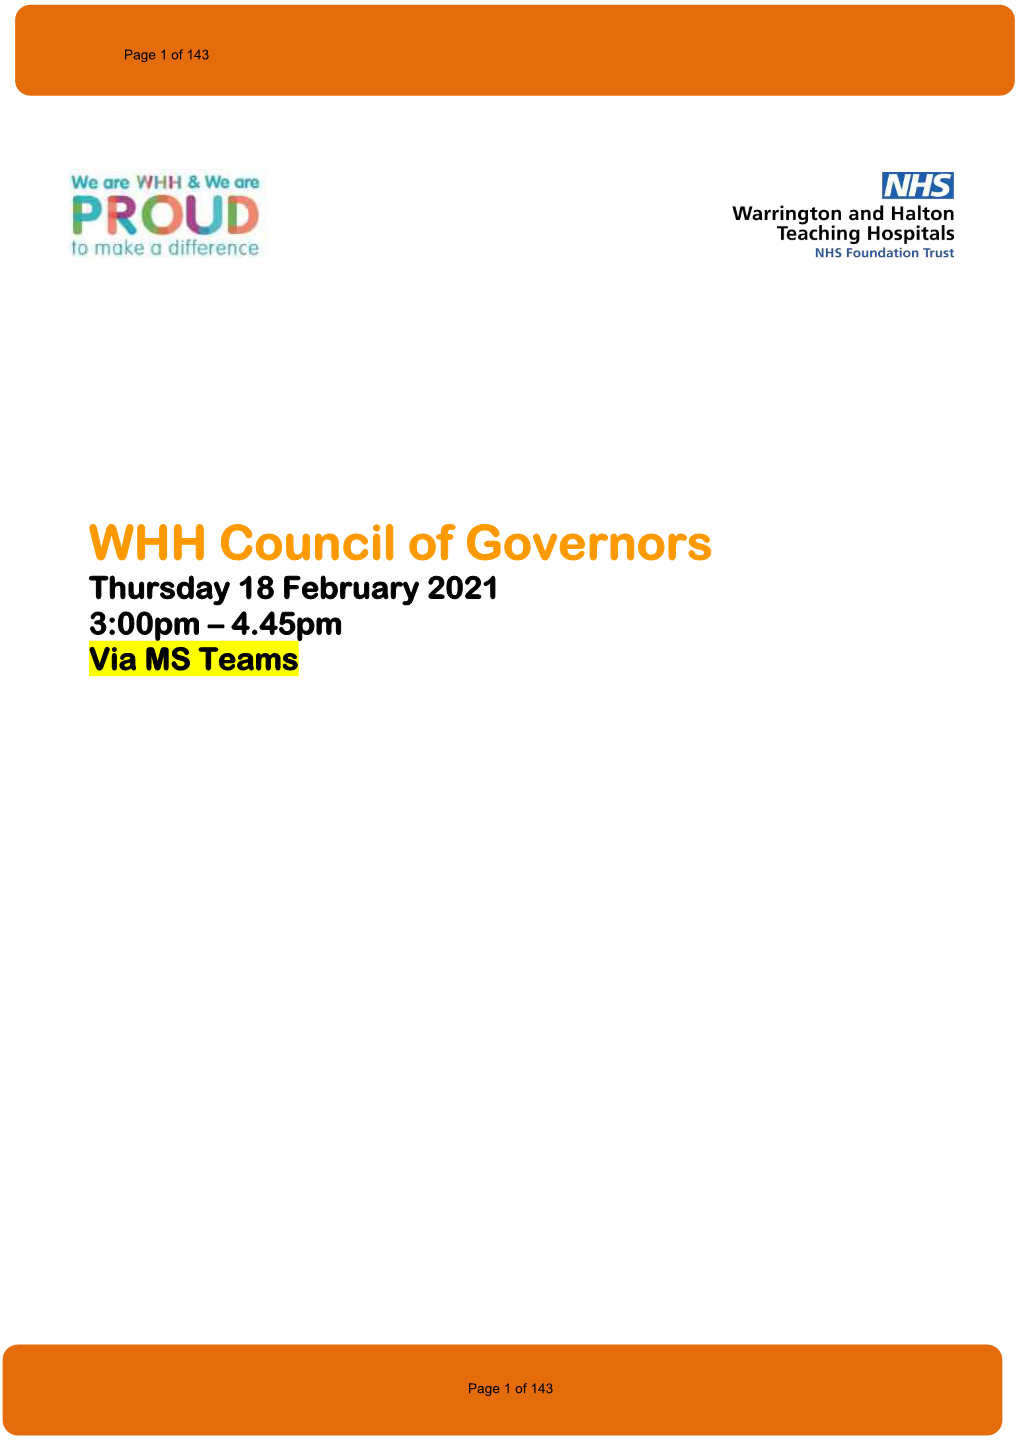 WHH Council of Governors